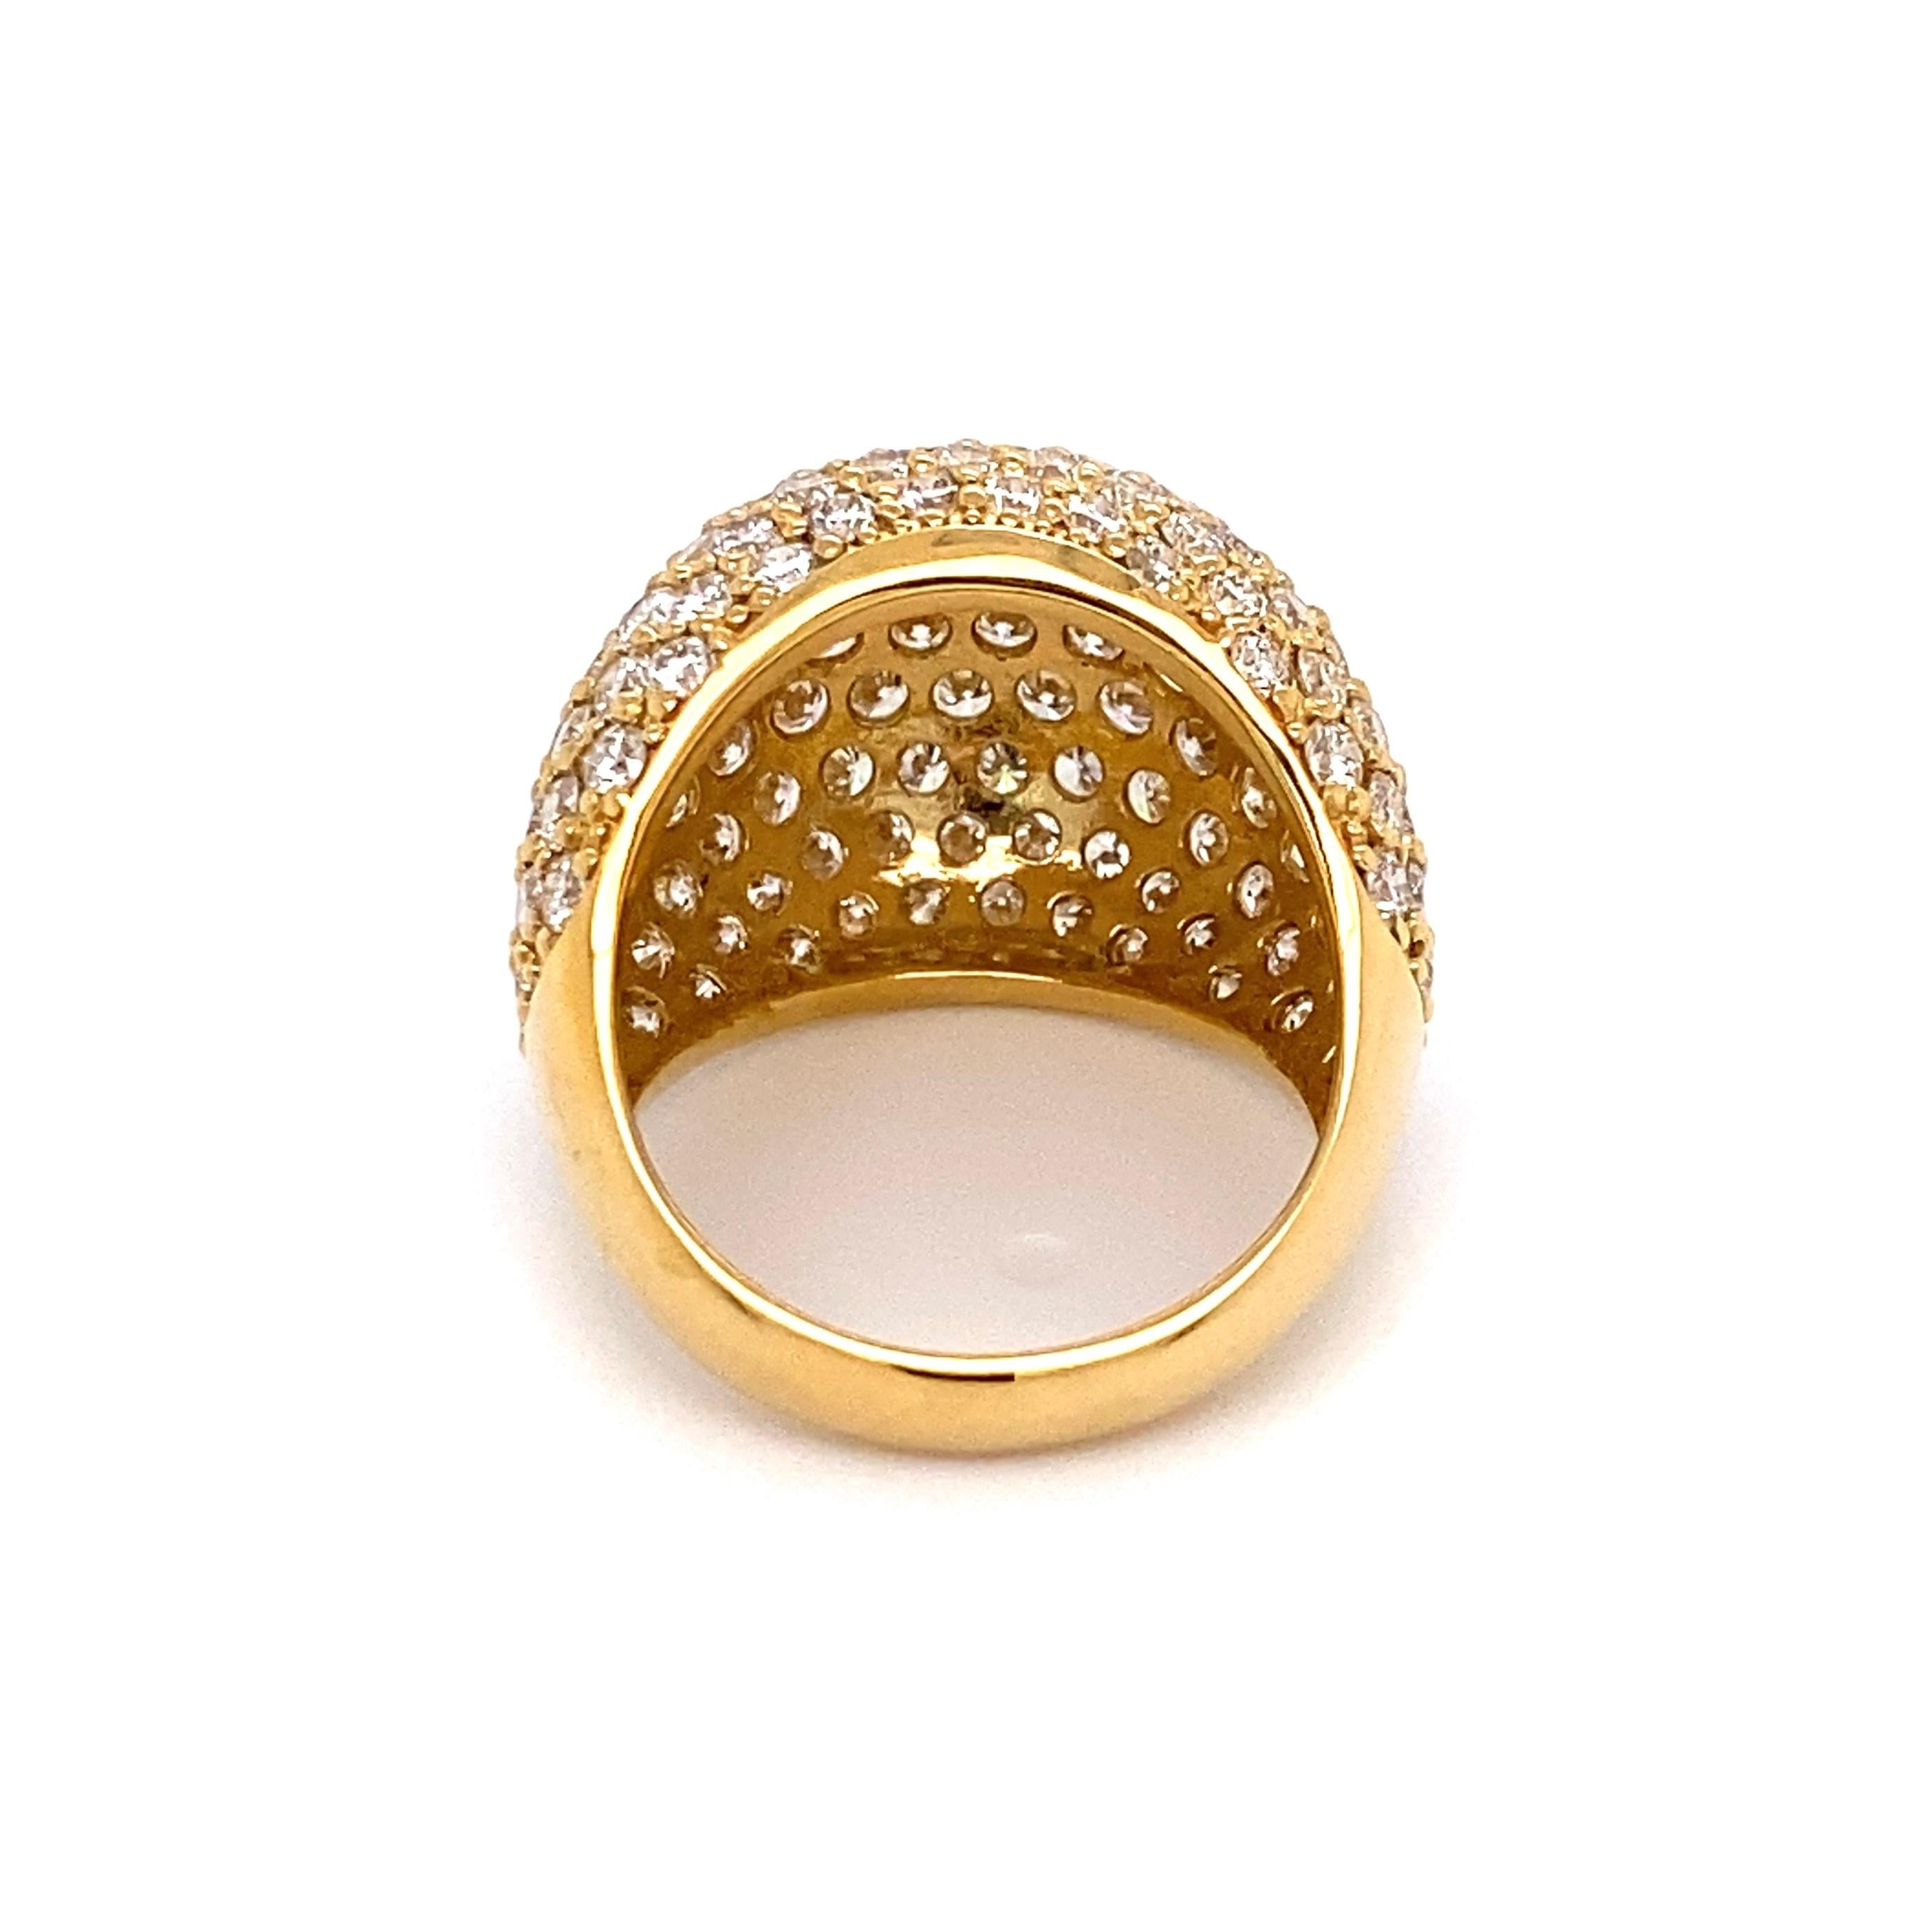 Pave Diamond Gold Dome Band Ring Estate Fine Jewelry In Excellent Condition For Sale In Montreal, QC